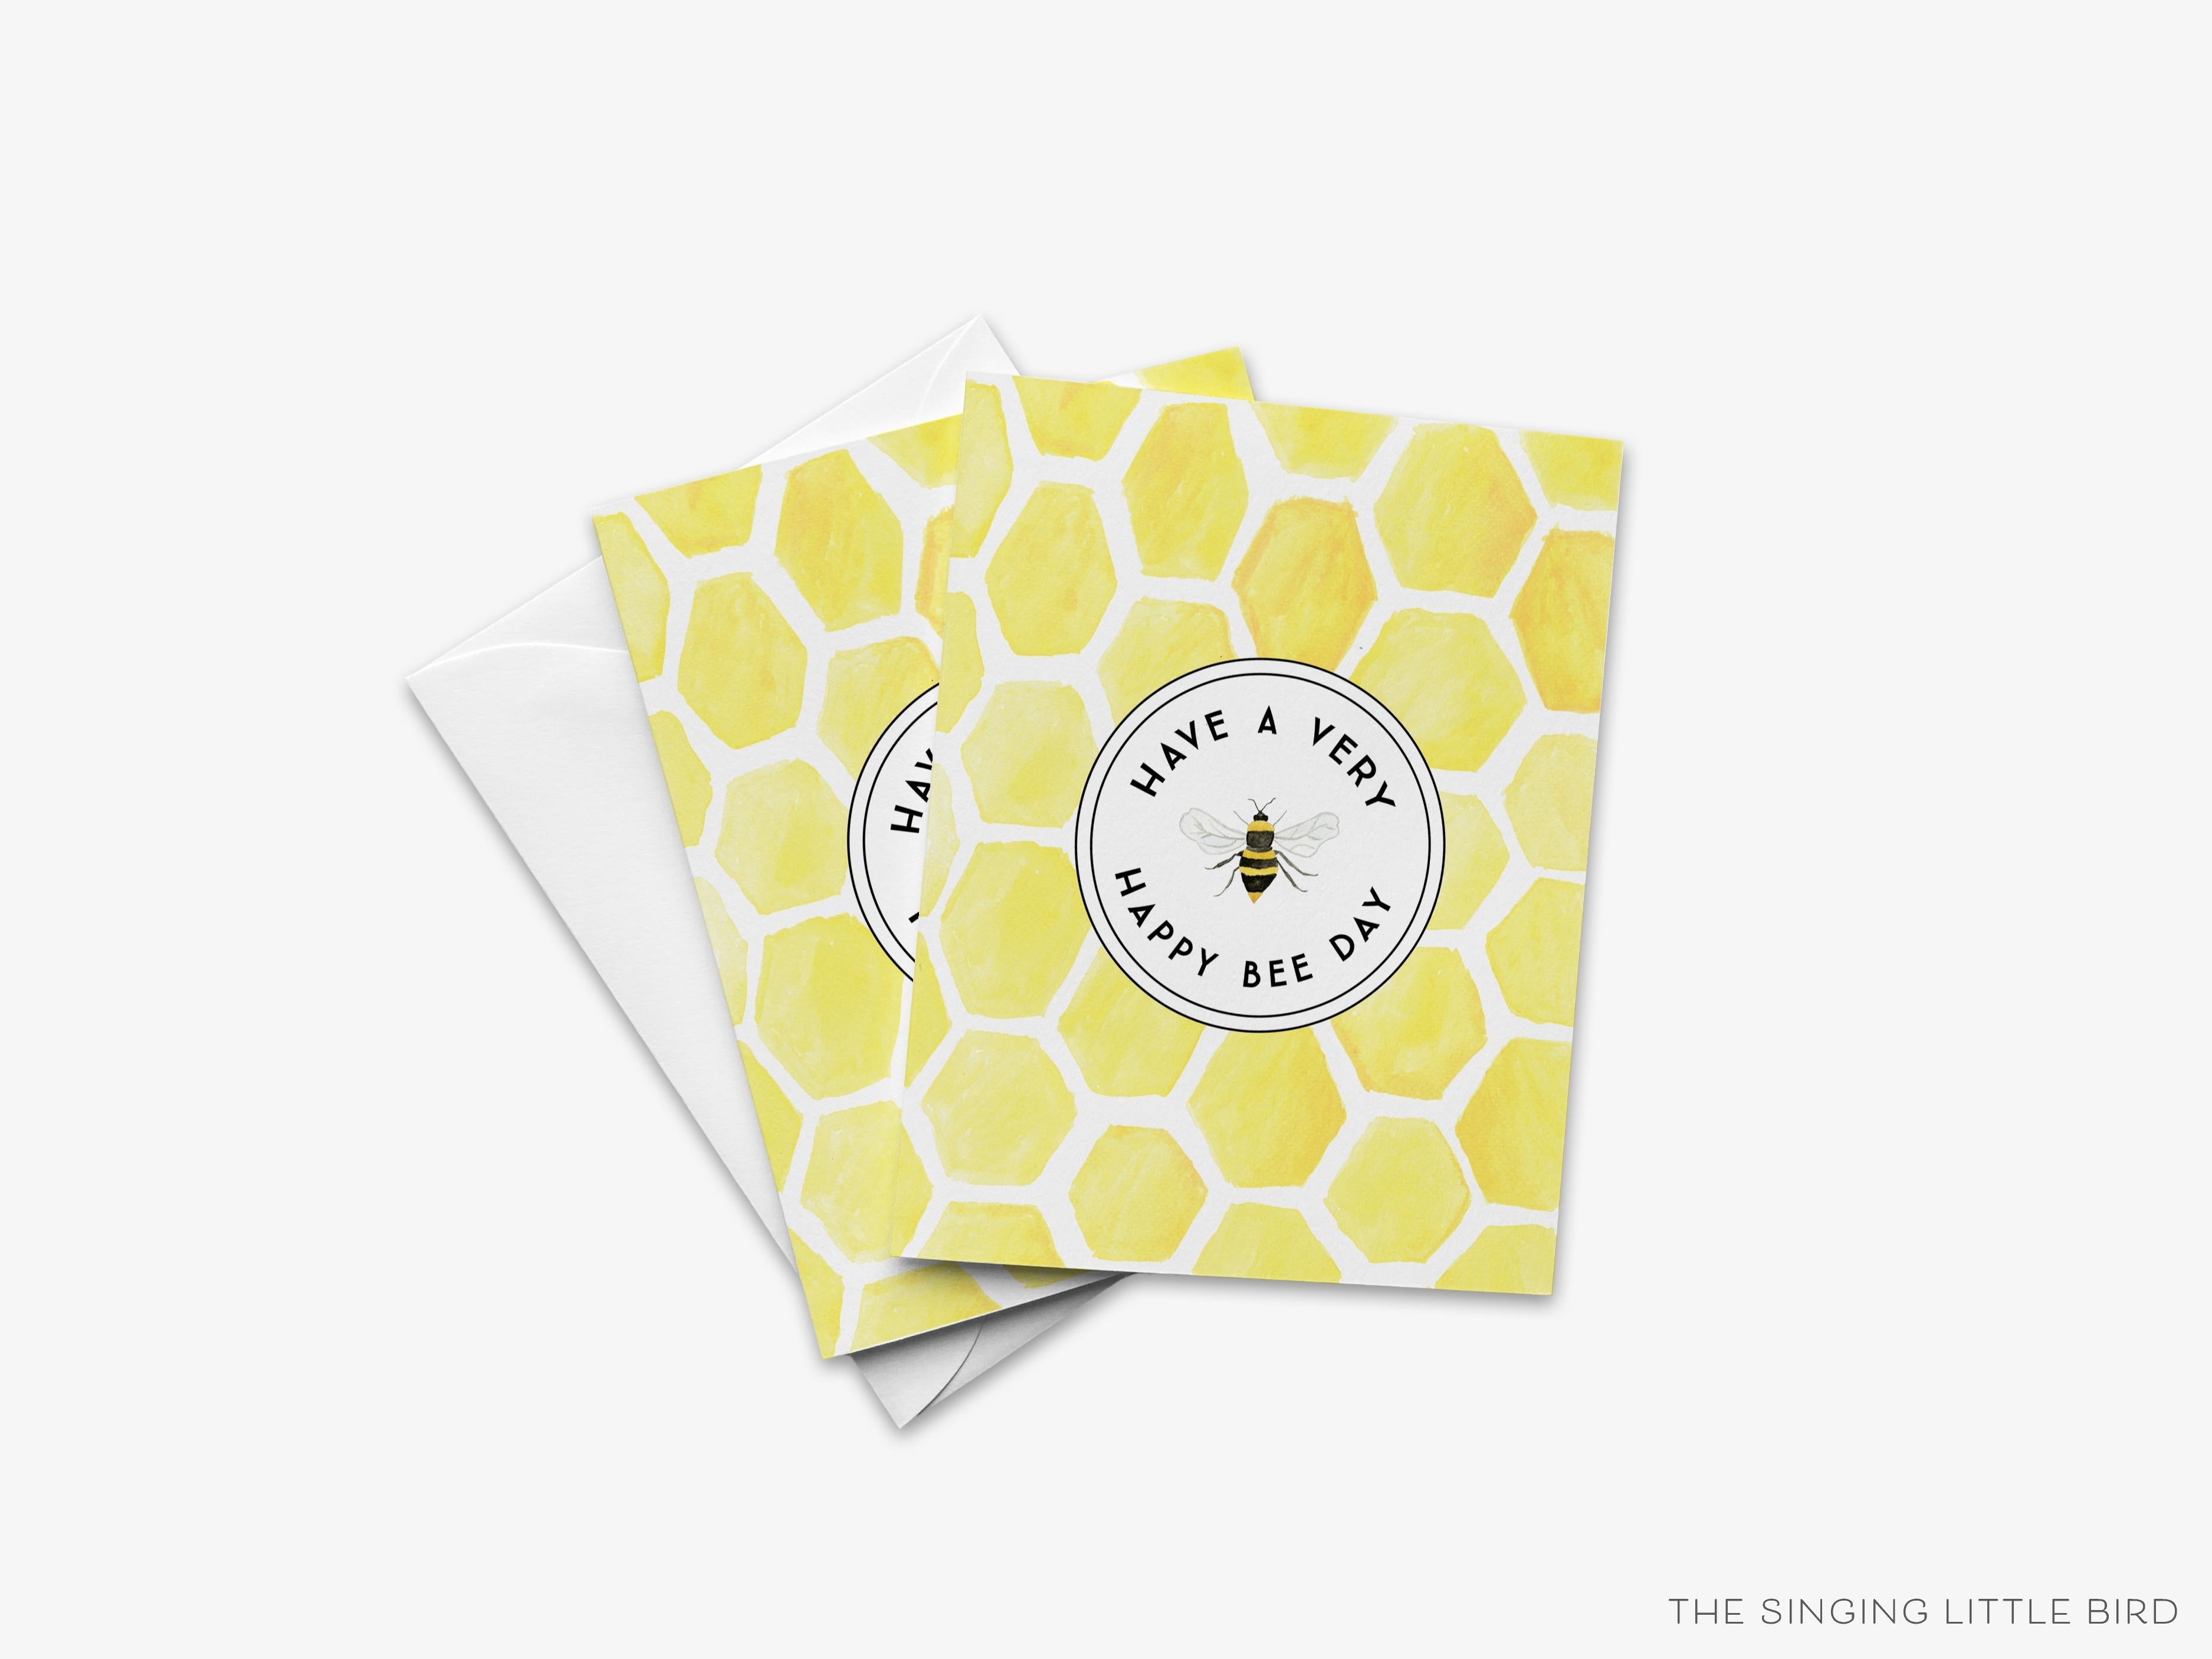 Bee Pun Birthday Card [Have A Very Happy Bee Day]-These folded birthday cards are 4.25x5.5 and feature our hand-painted watercolor bee, printed in the USA on 100lb textured stock. They come with a White envelope and make a great birthday card for the bee pun lover in your life.-The Singing Little Bird